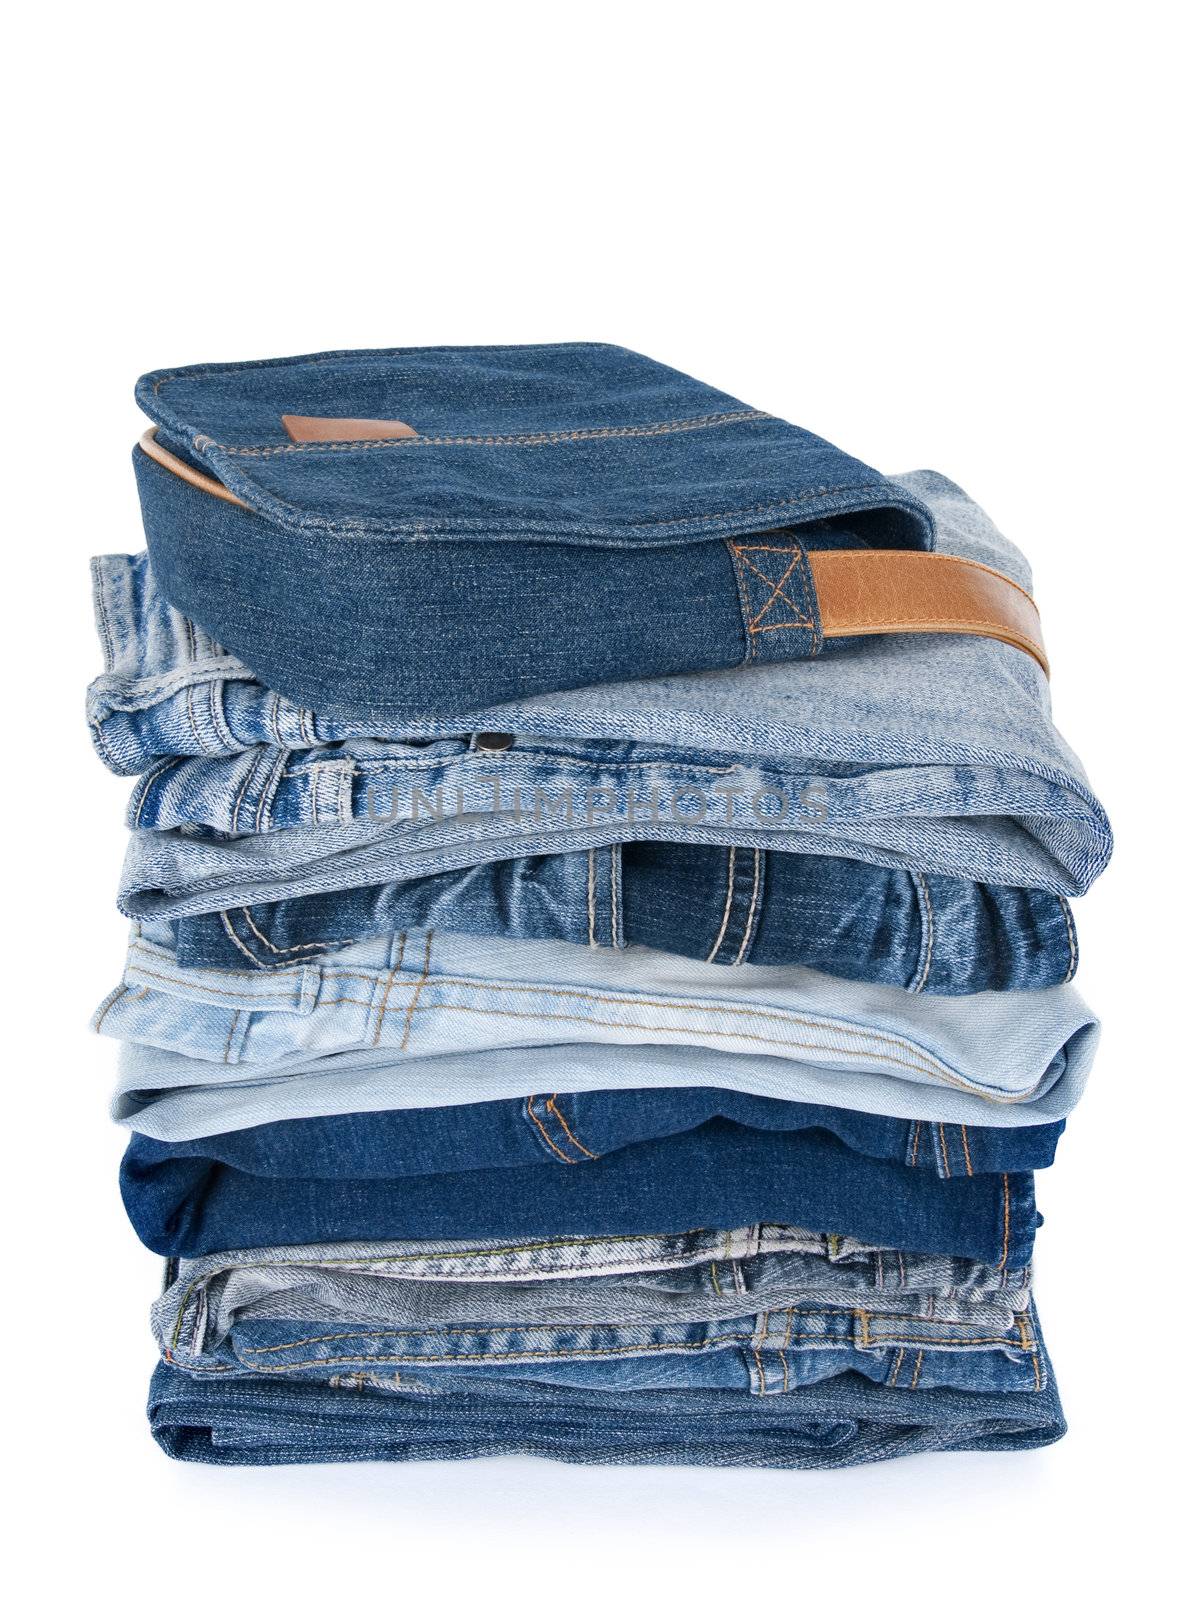 Stack of jeans and a denim bag on white background.